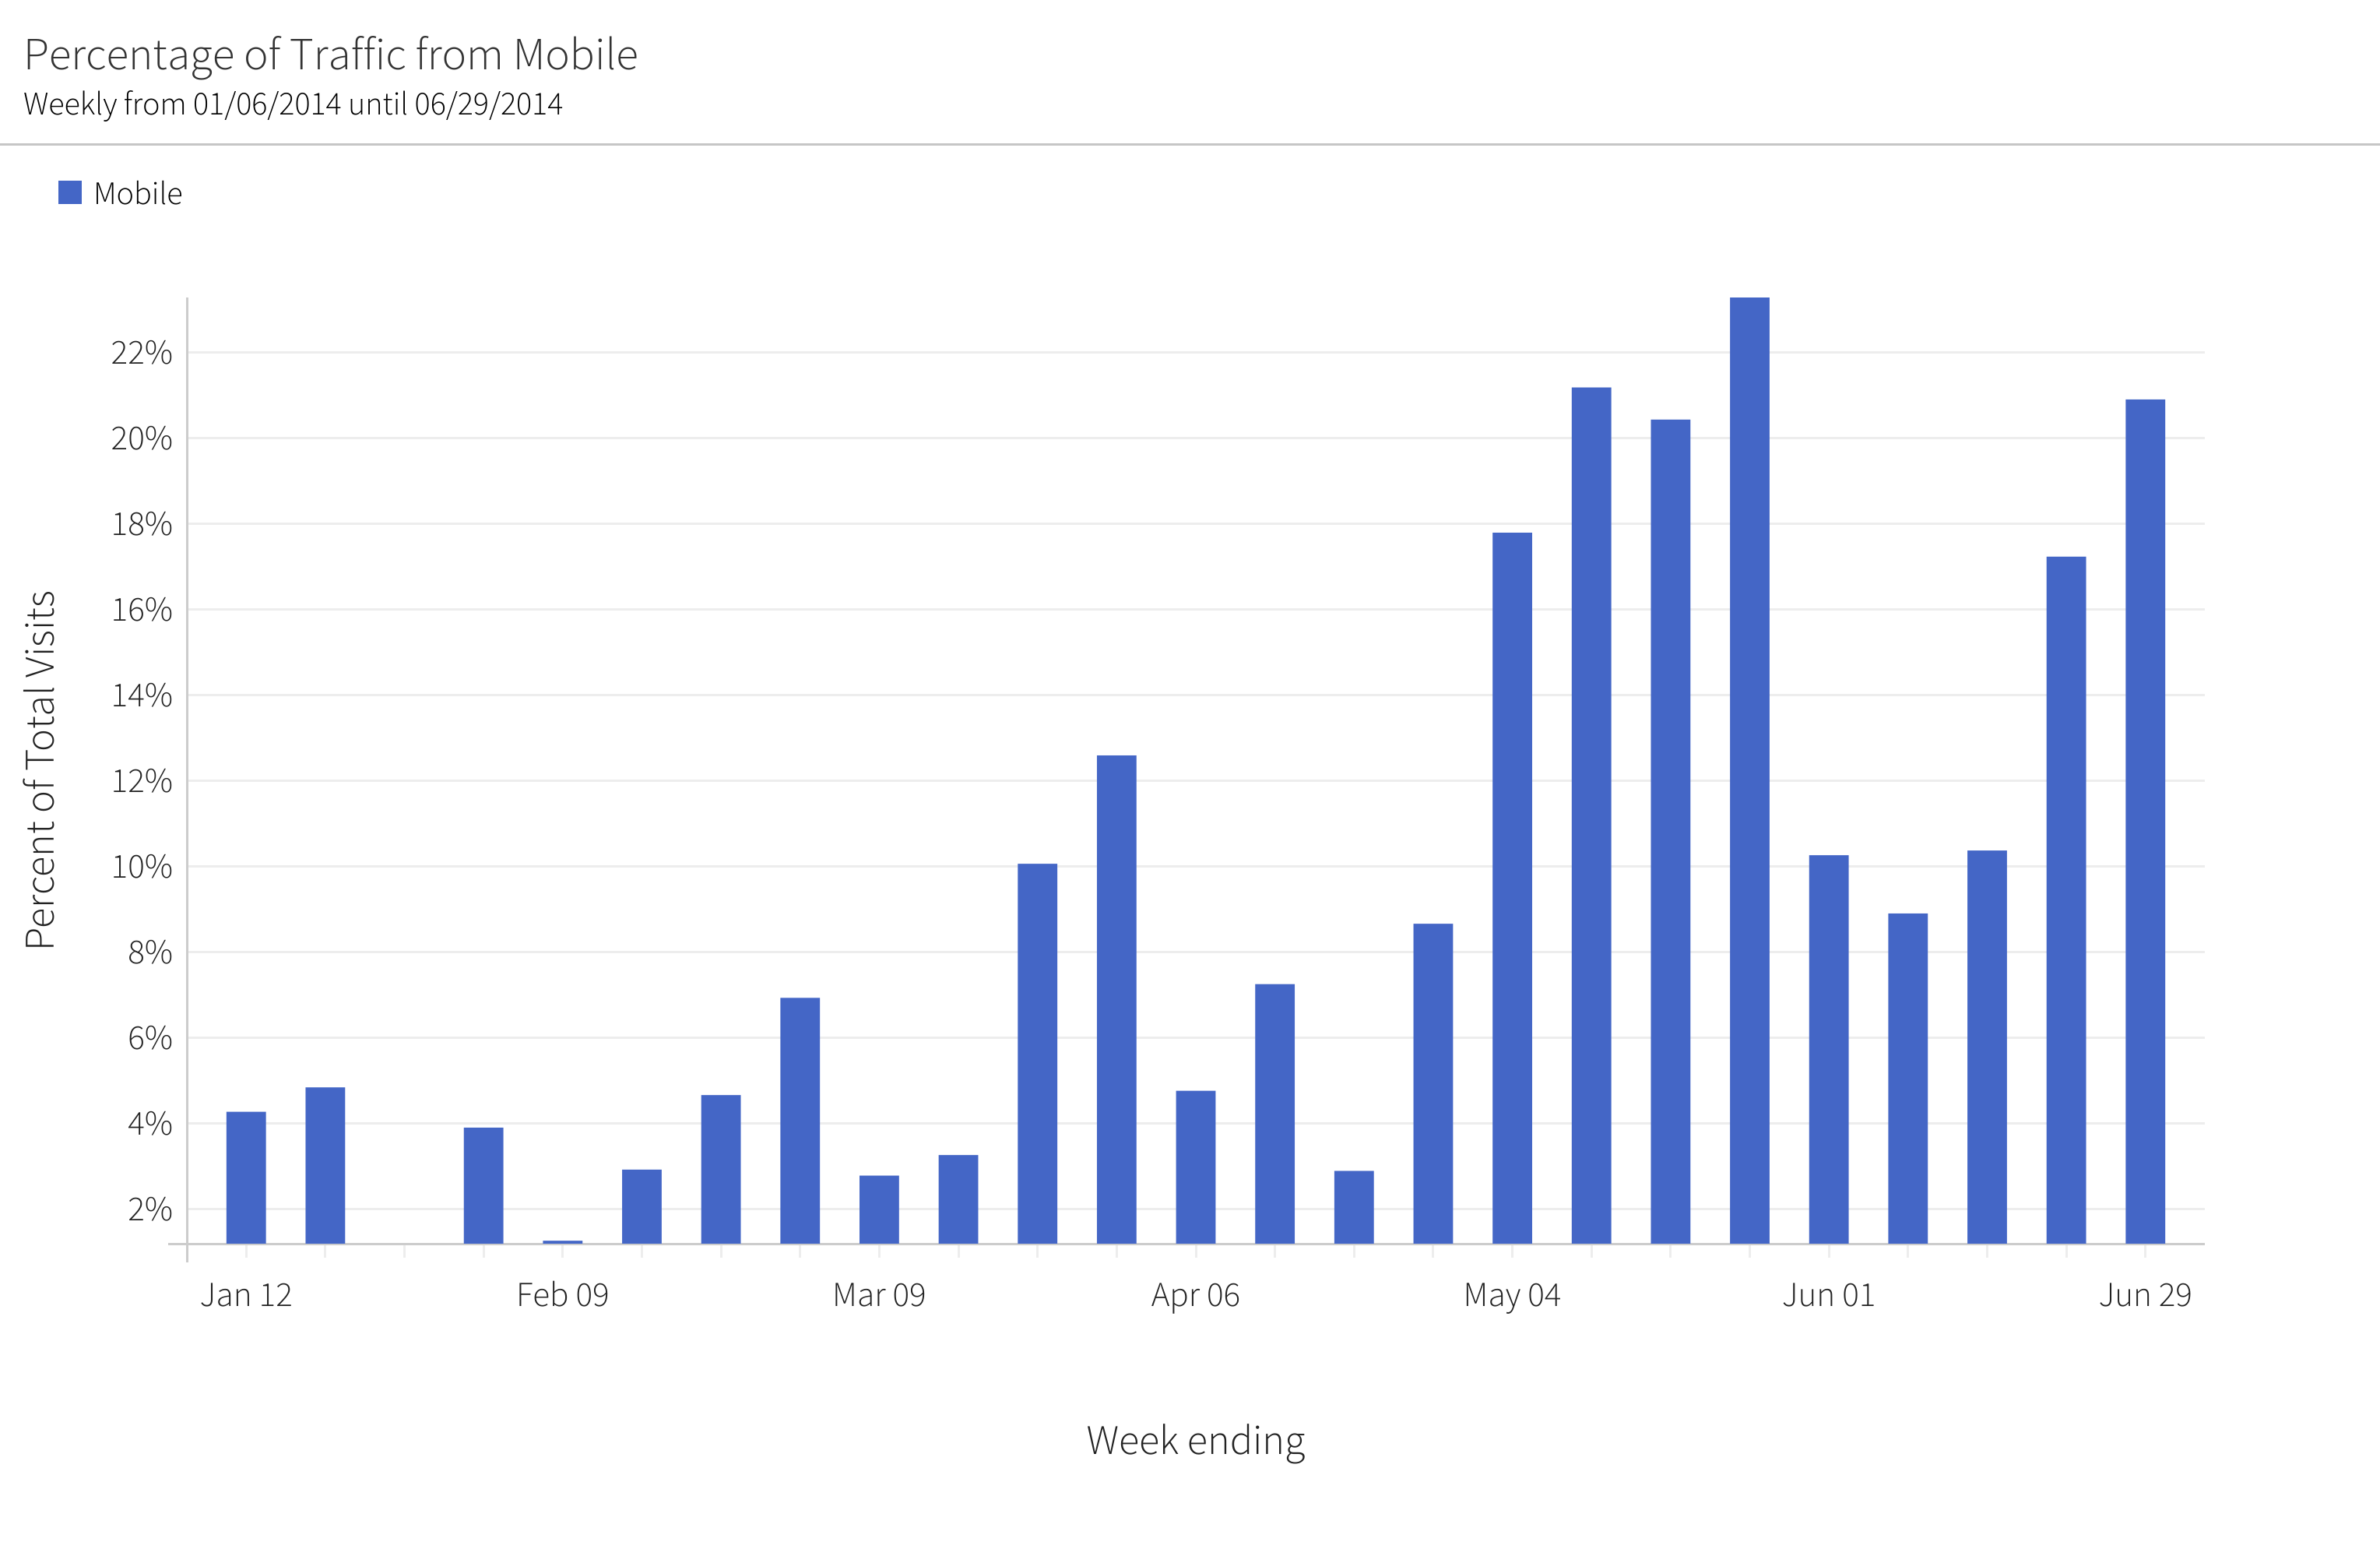 megalytic chart showing percentage of traffic from mobile over time